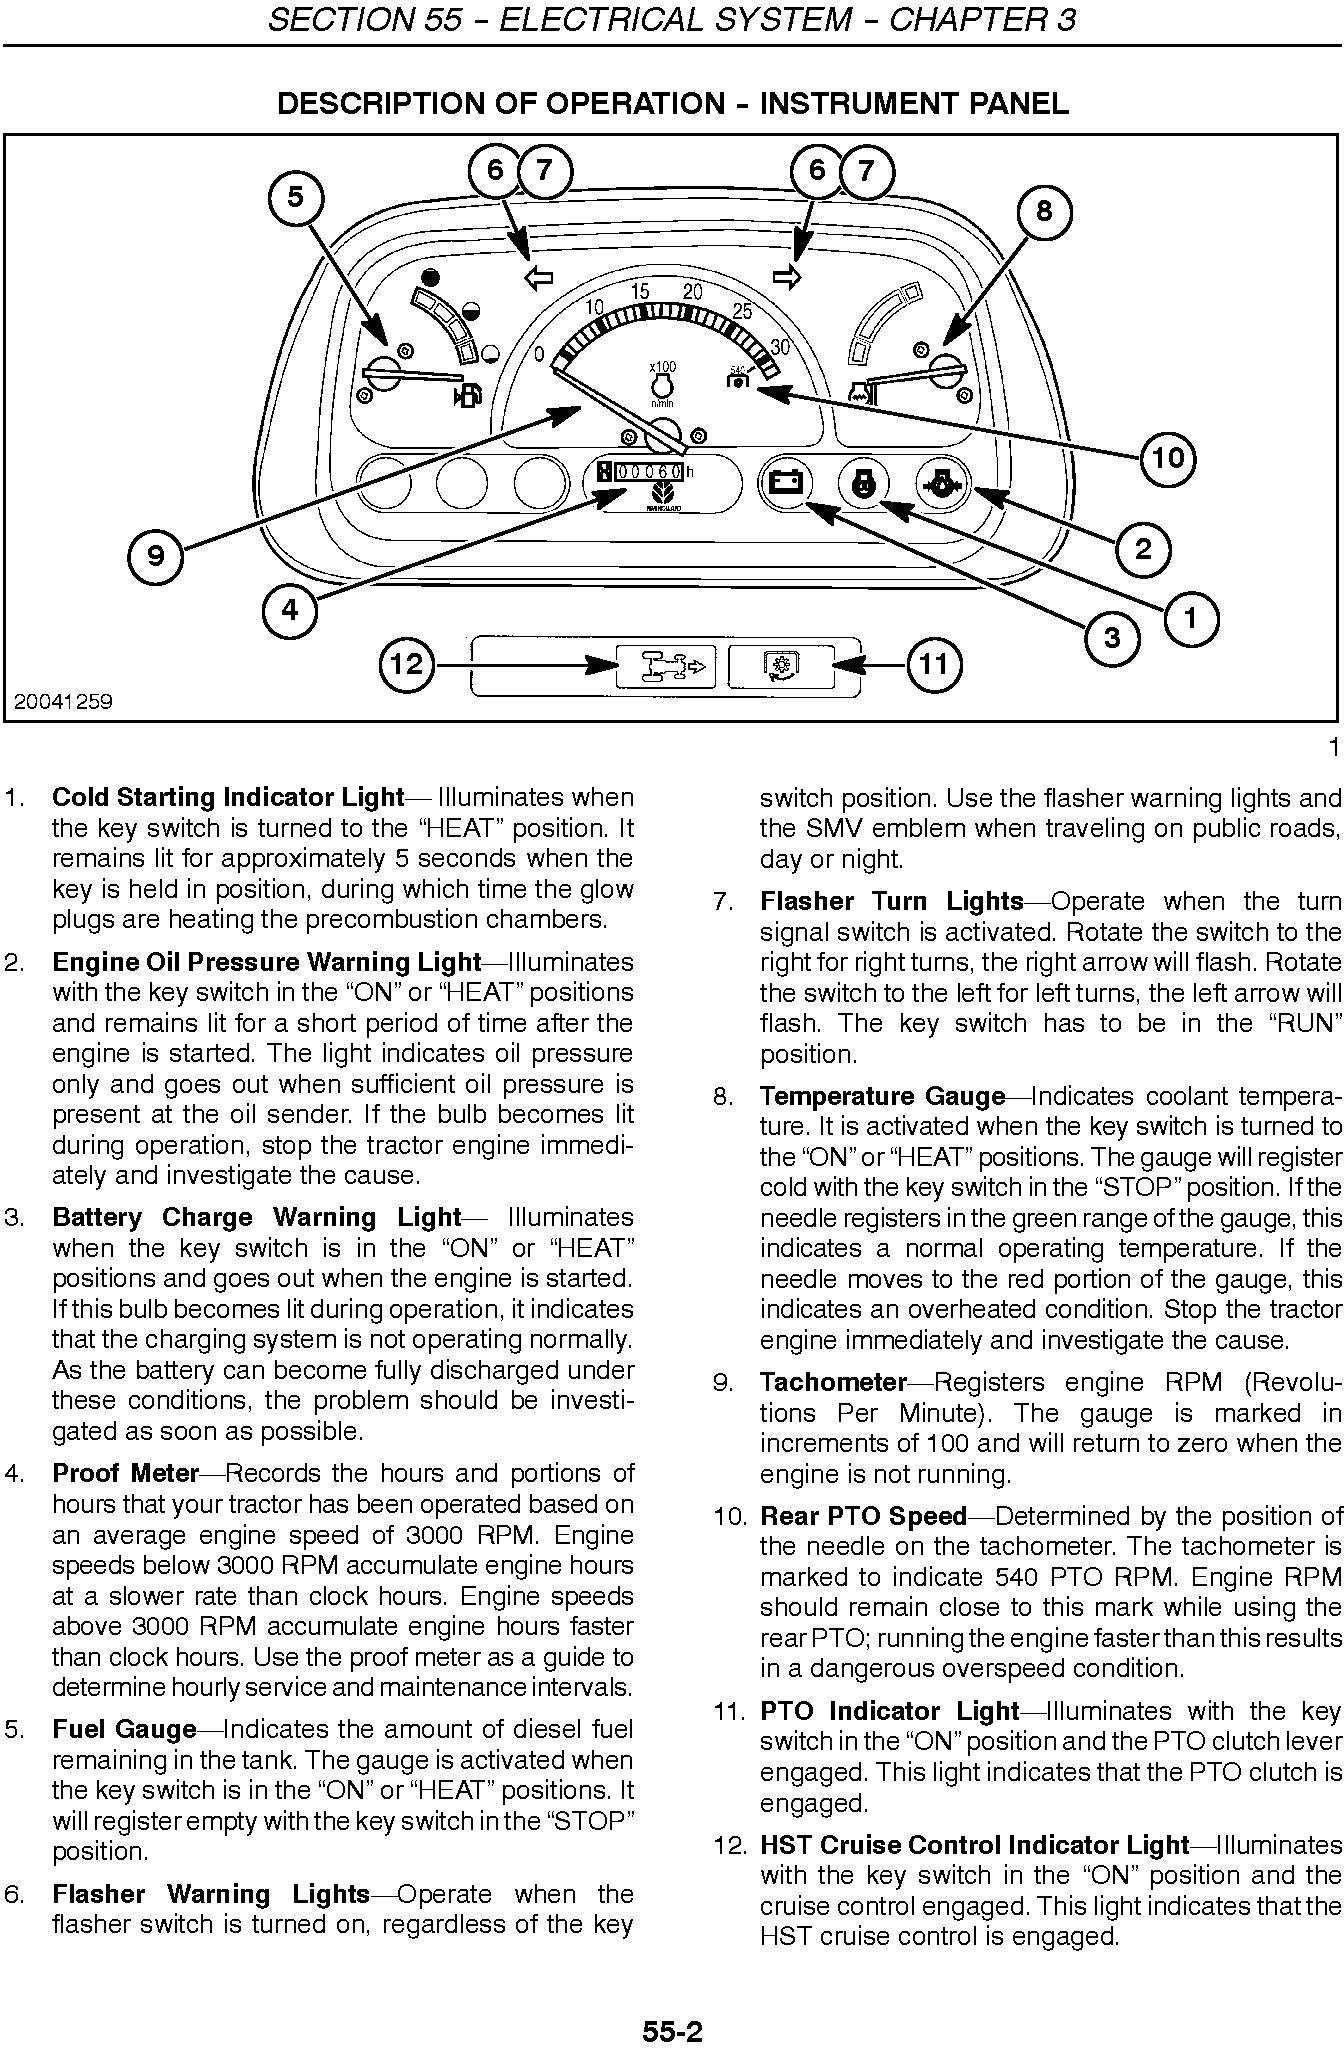 New Holland T1010, T1030, T1110 Tractor Service Manual - 3